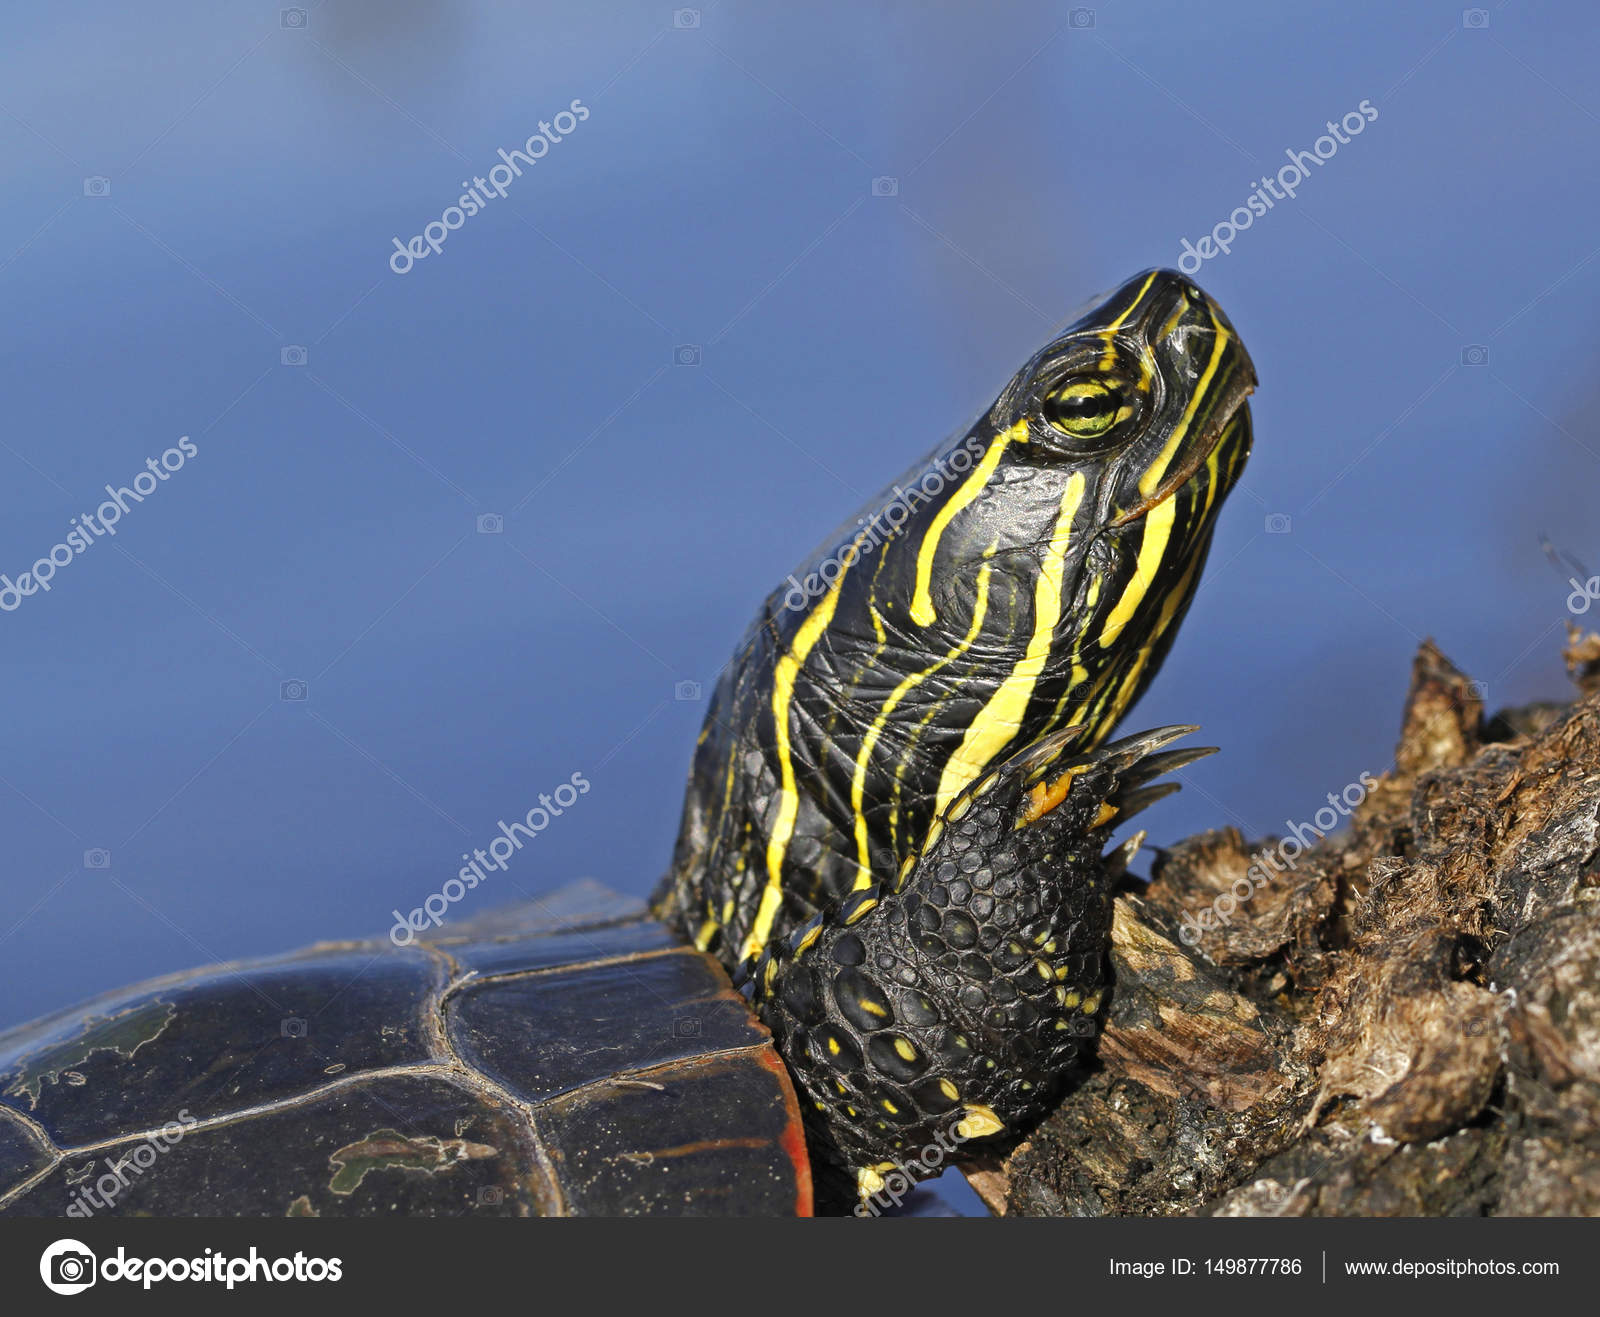 Western painted turtle — Stock Photo © juerpa #149877786